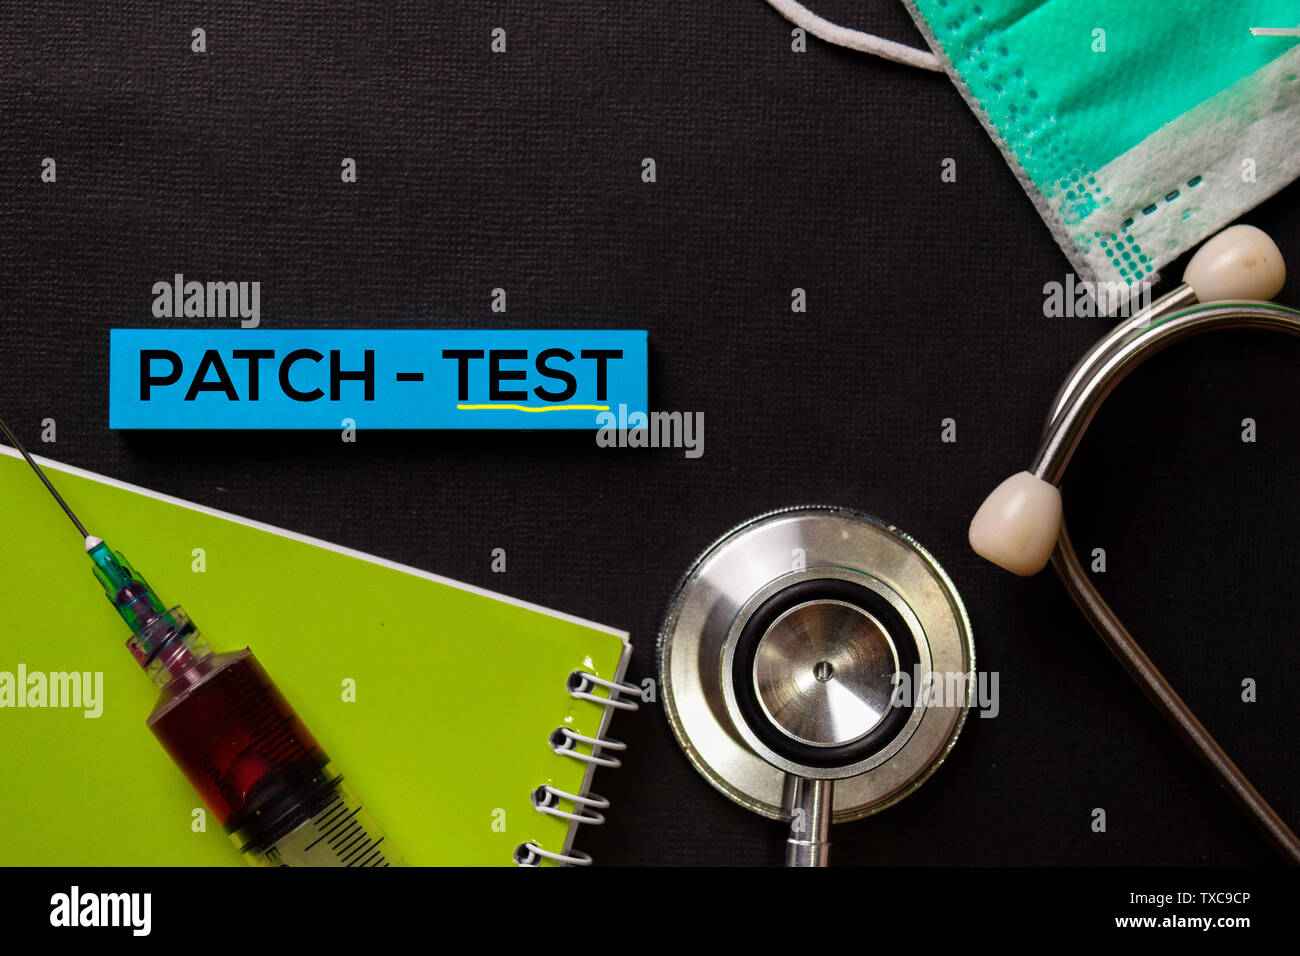 Patch - Test on top view black table with blood sample and Healthcare/medical concept. Stock Photo